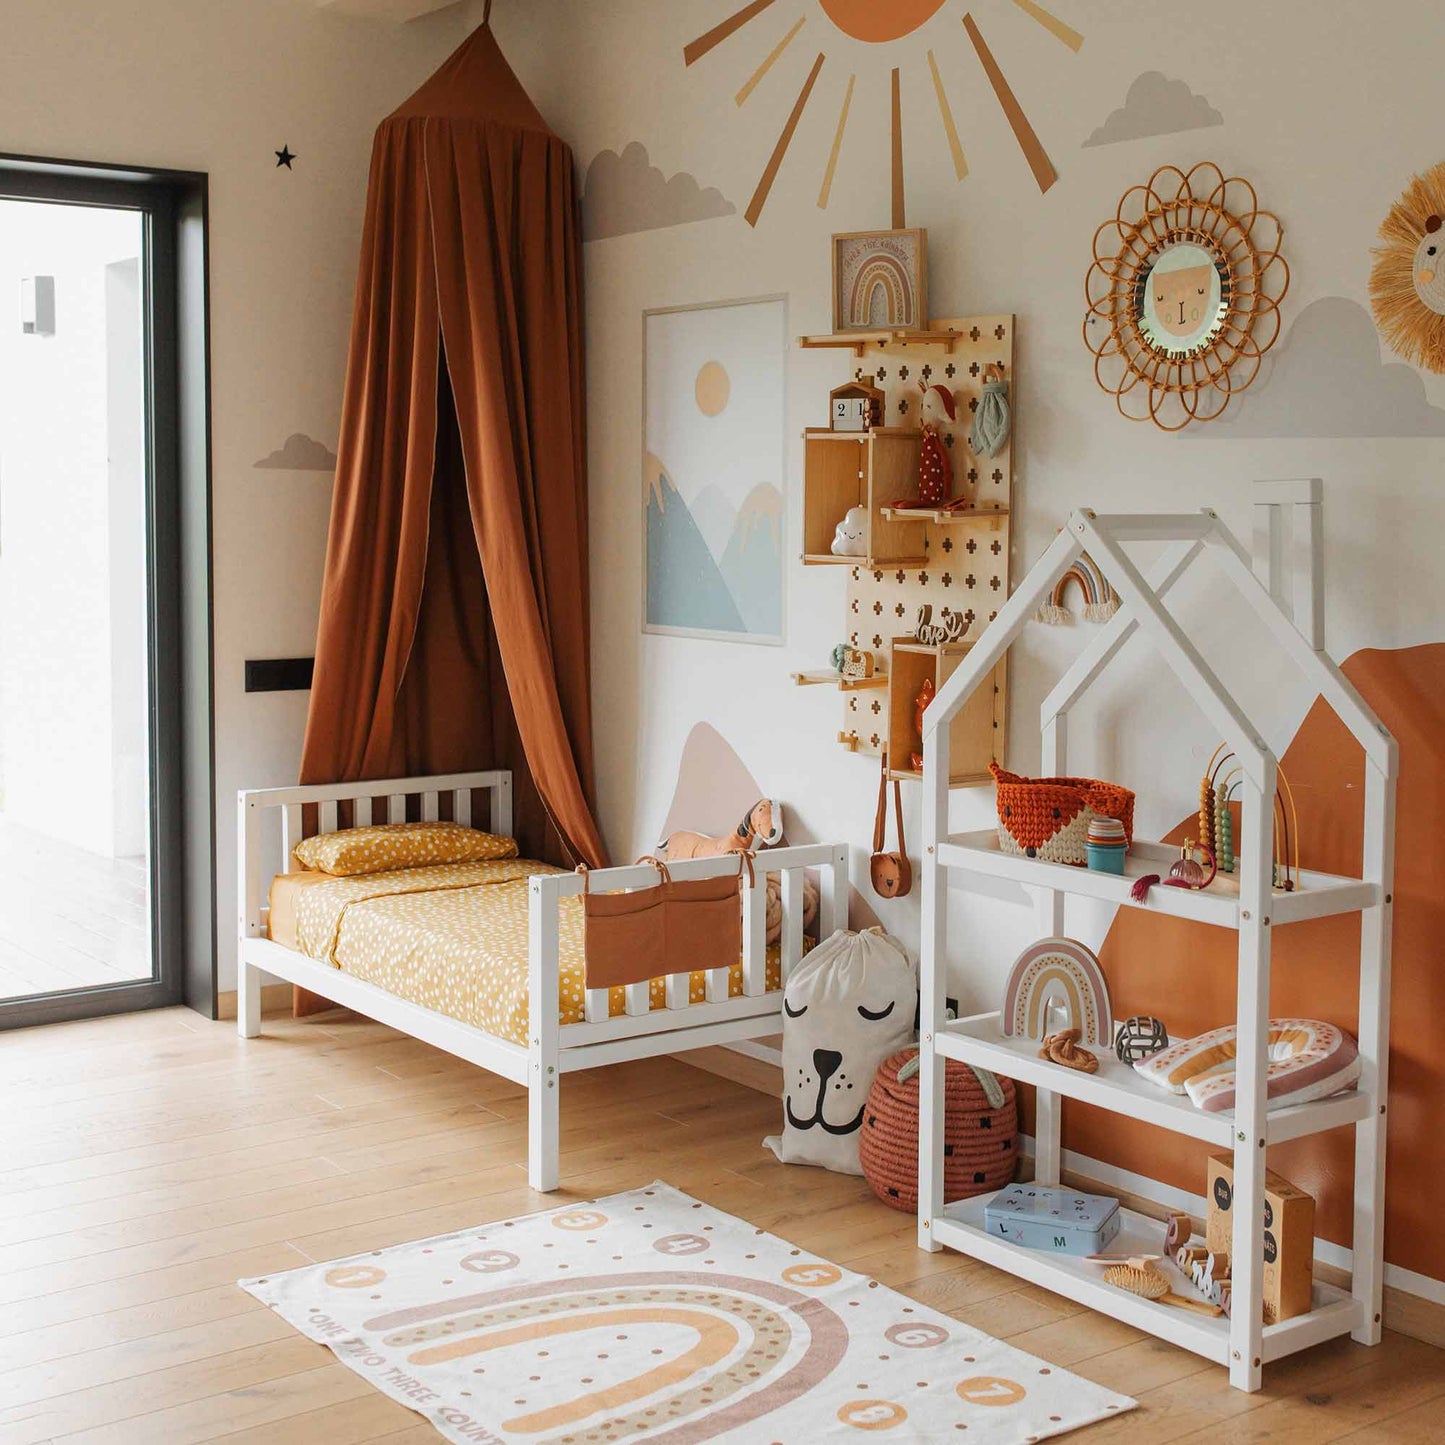 Raised kids' bed on legs with a headboard and footboard